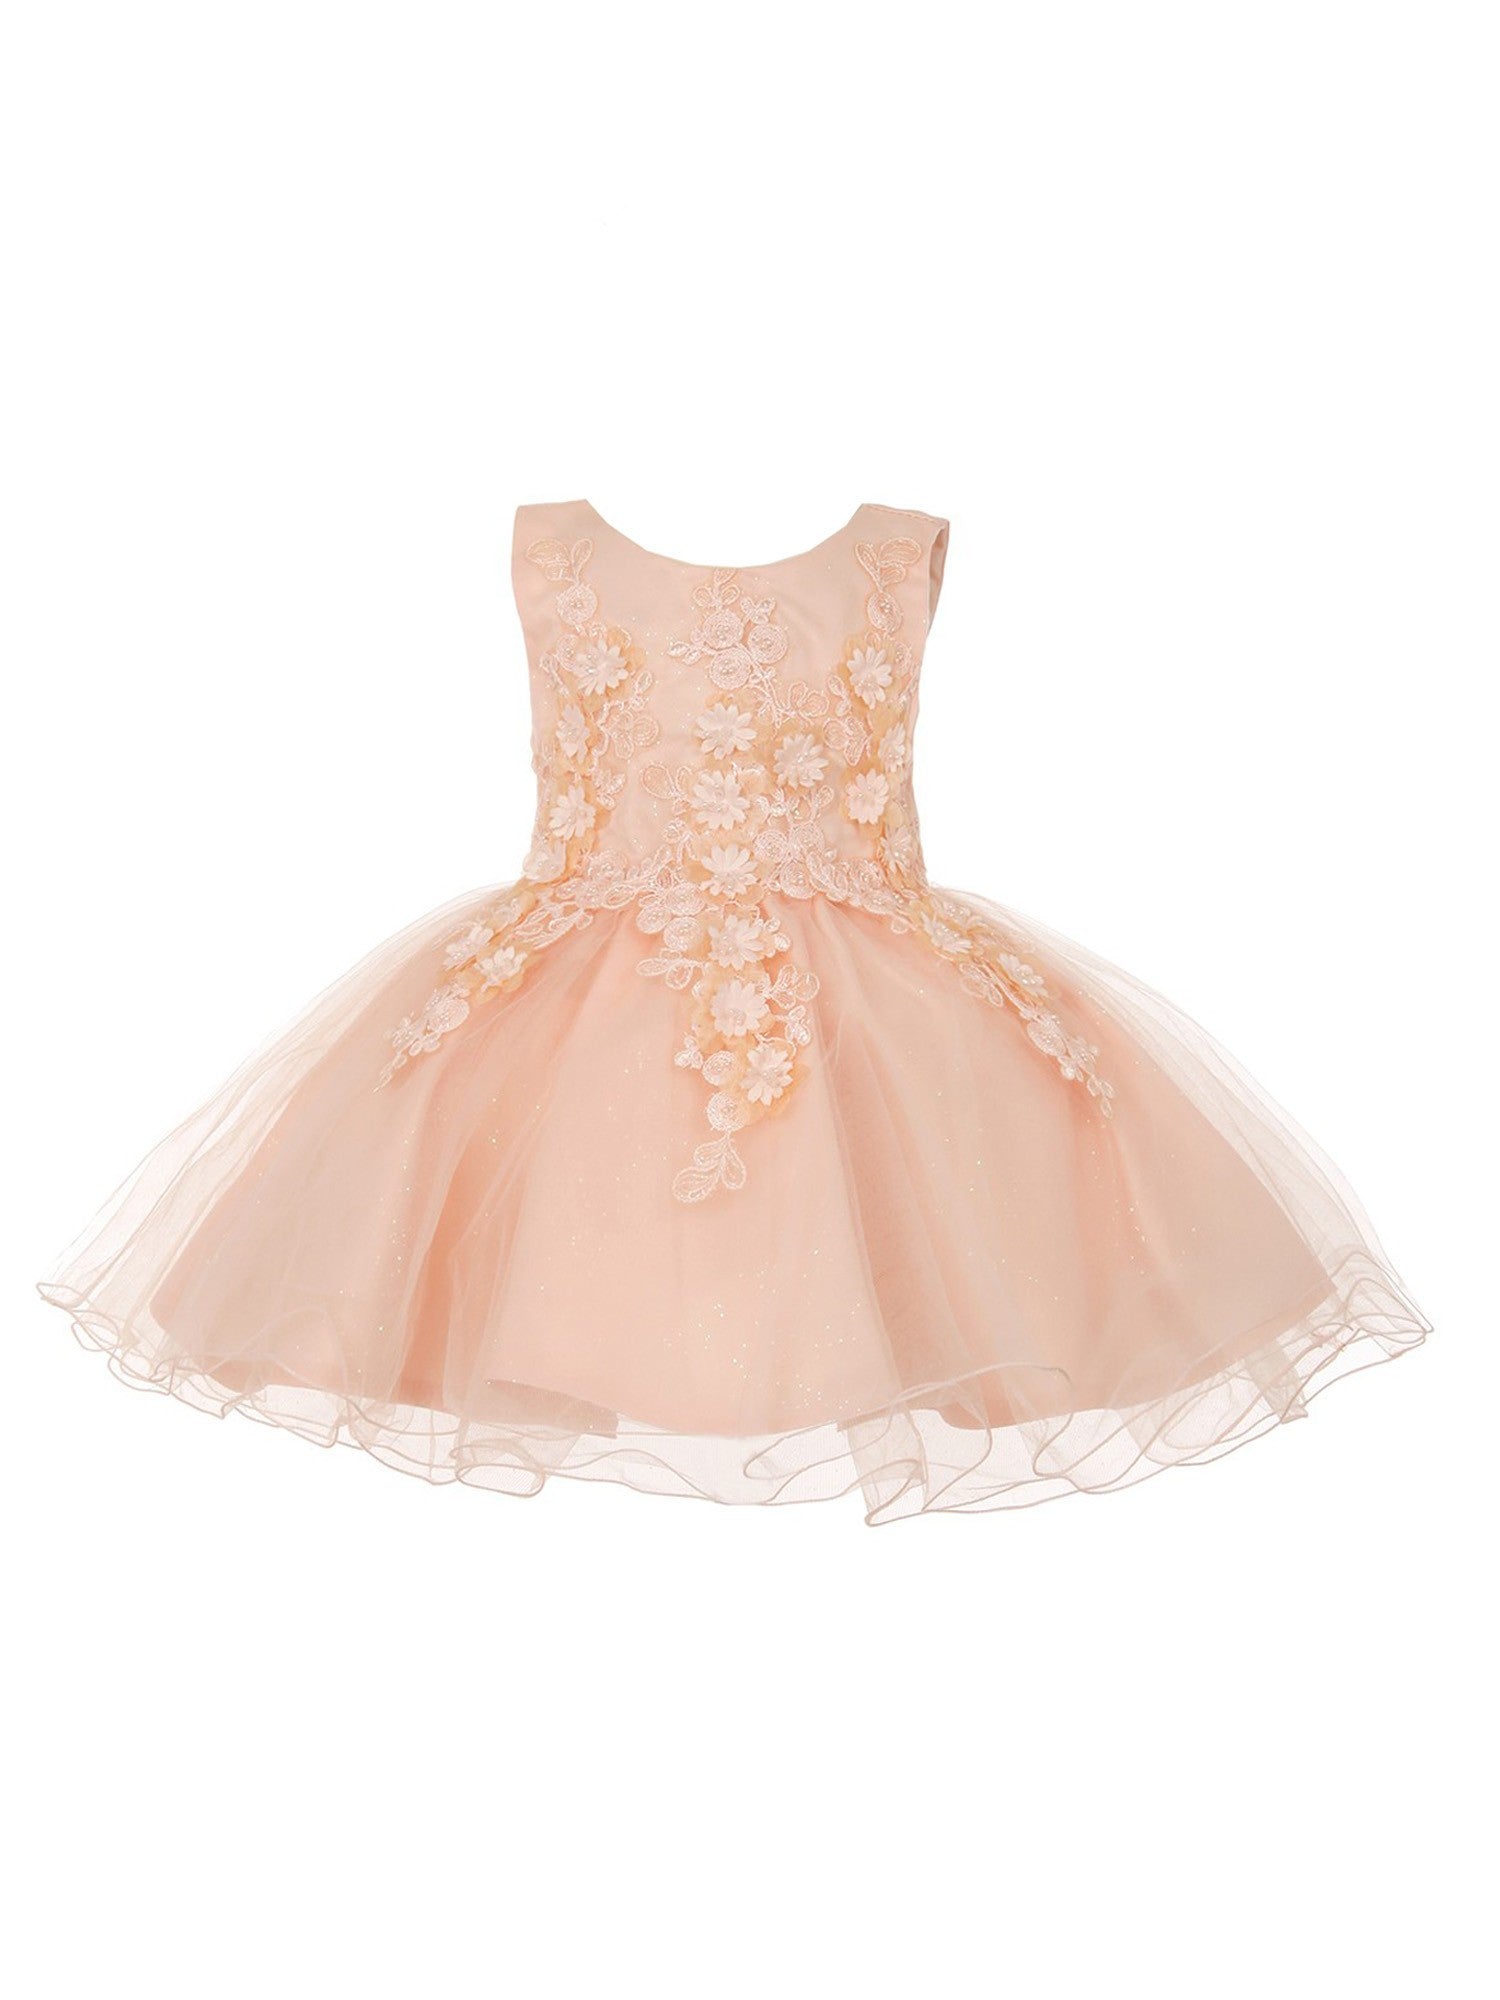 Beautiful Sleeveless Birthday Party Dresses for Princess 0-3 month